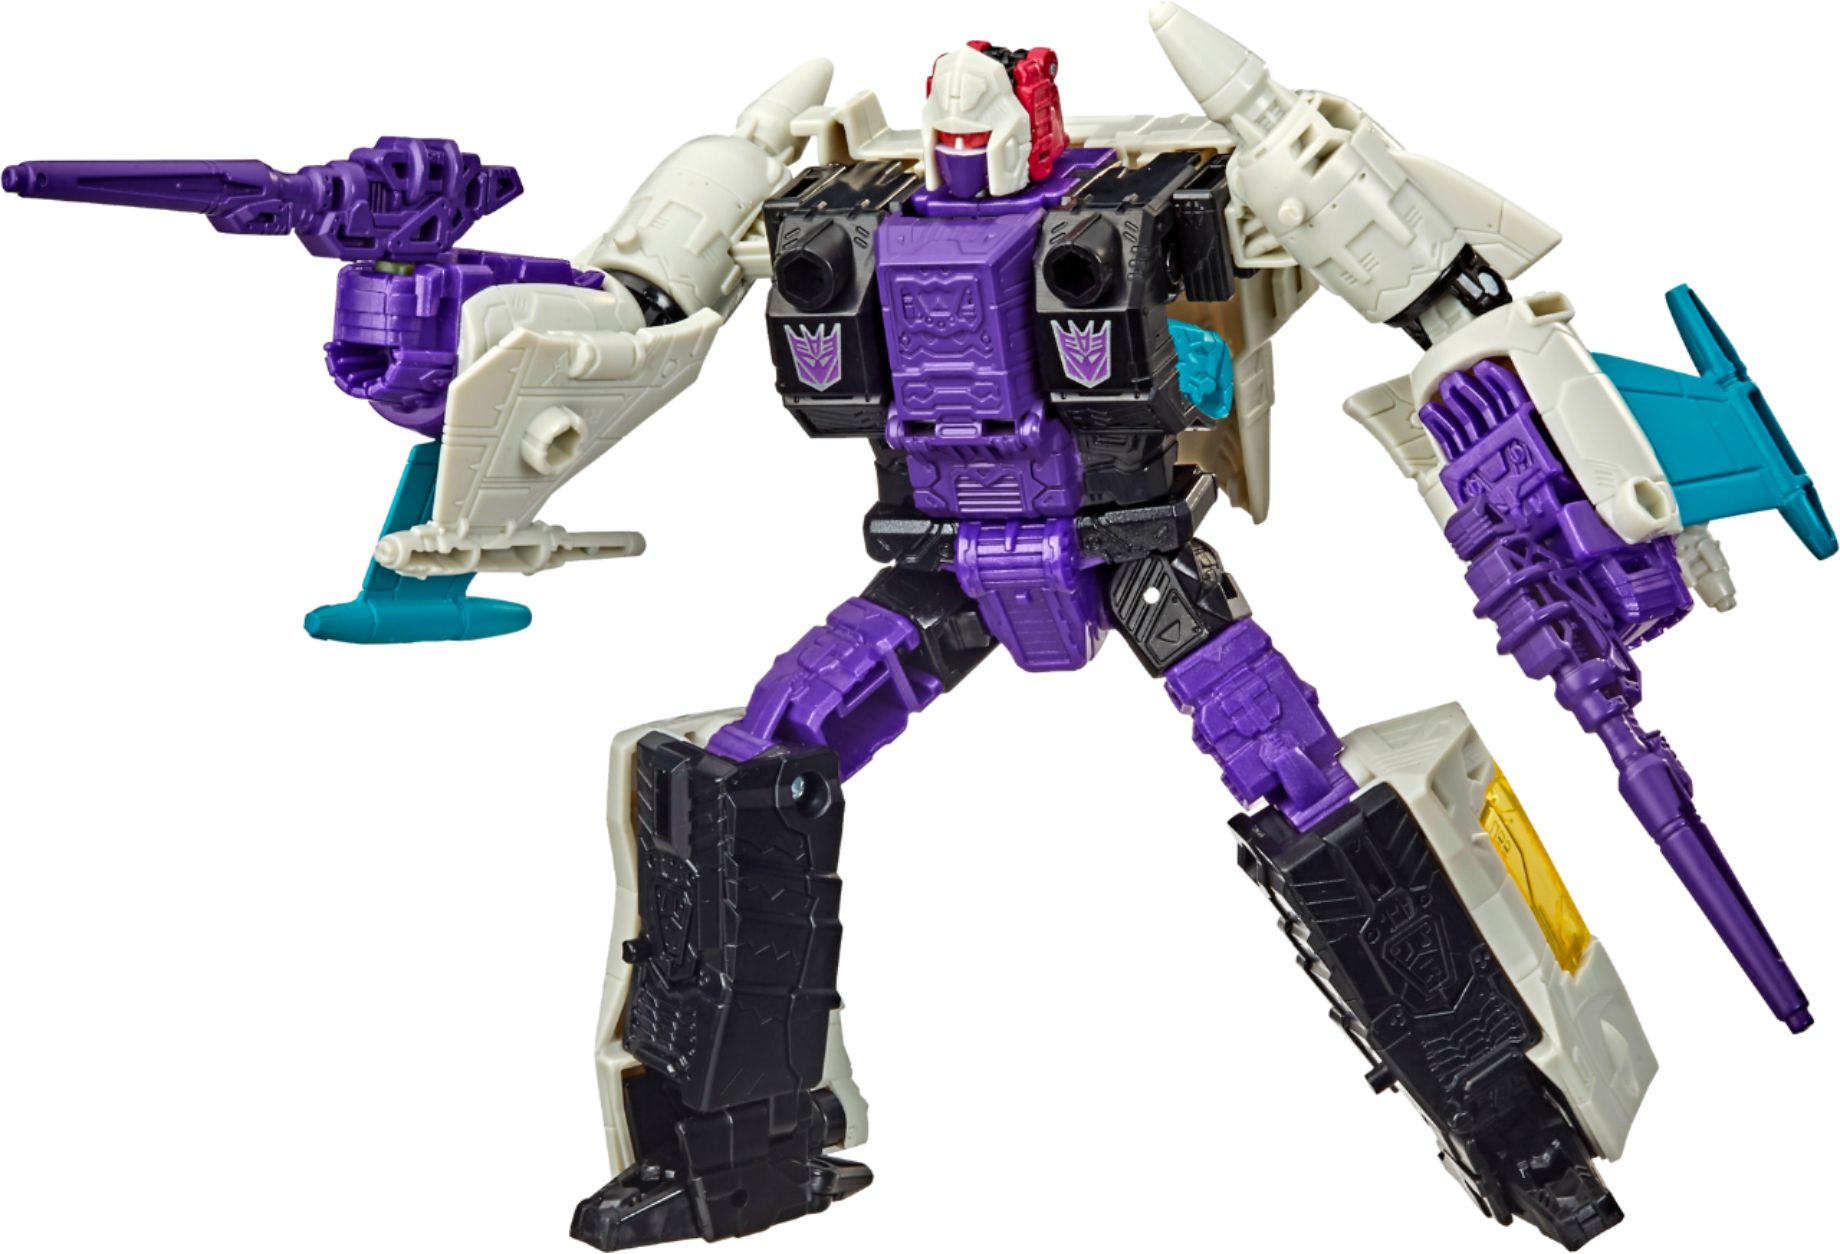 Transformers - Generations War for Cybertron Earthrise Voyager WFC-E21 Decepticon Snapdragon